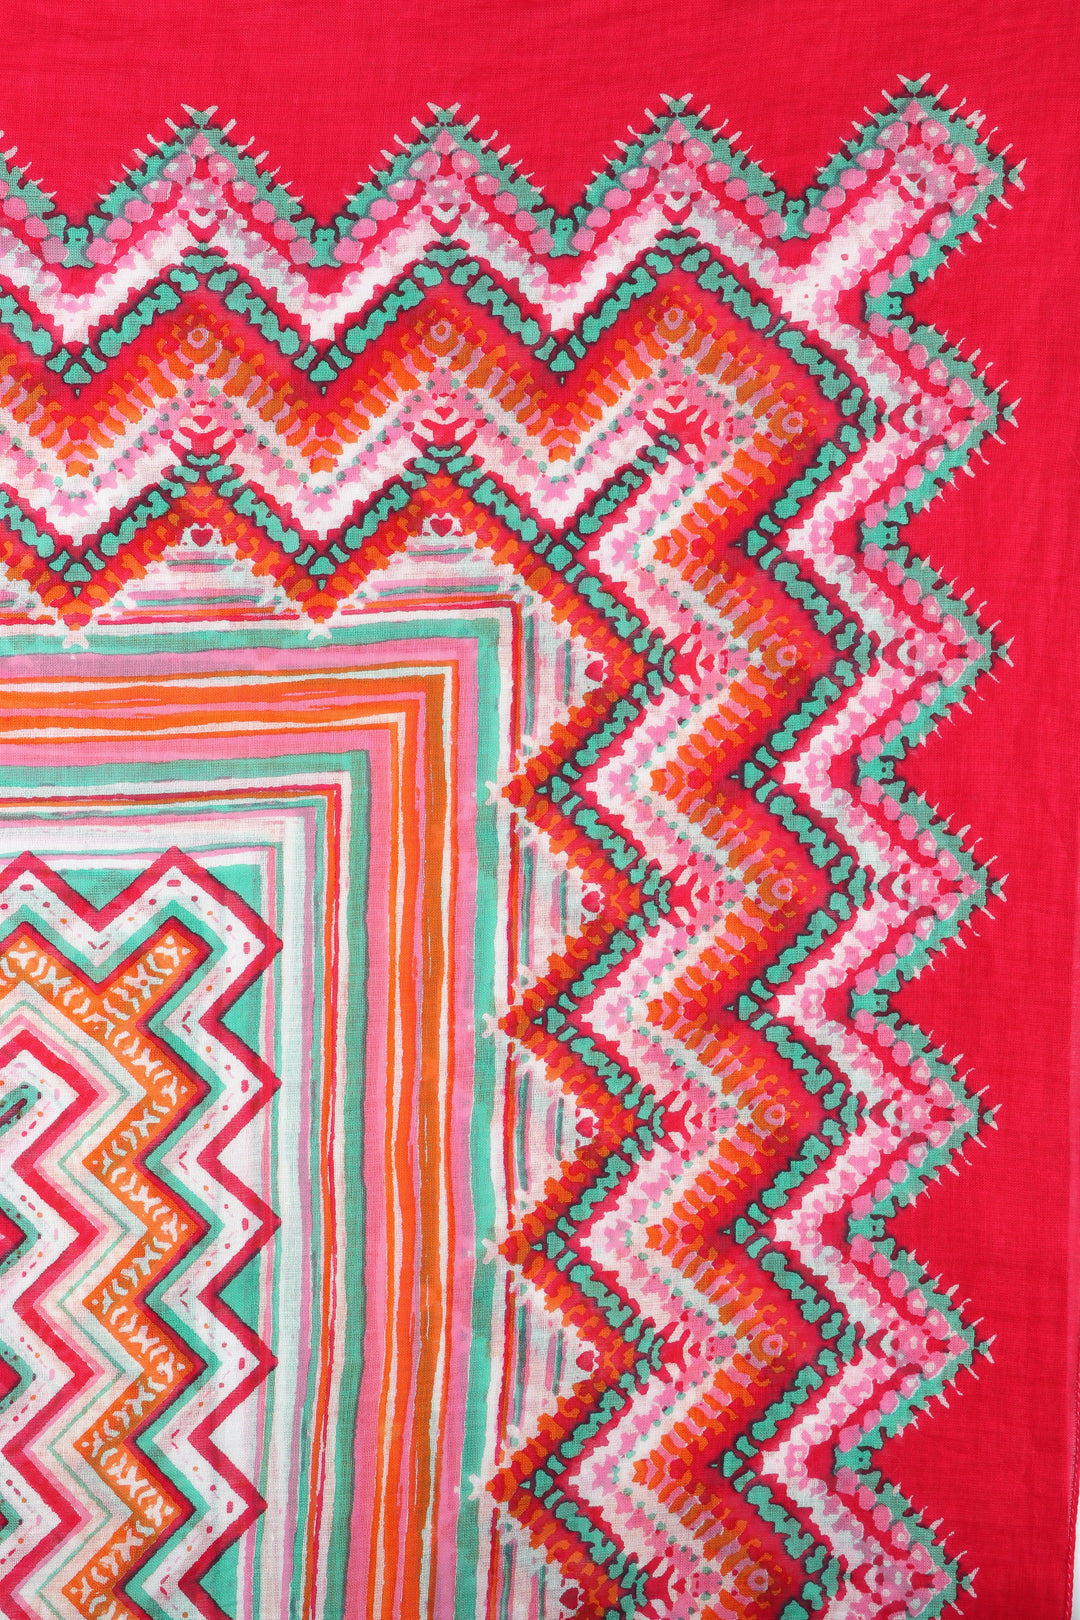 close up of the zig zag geometric pattern, showing the colours green, pink and orange